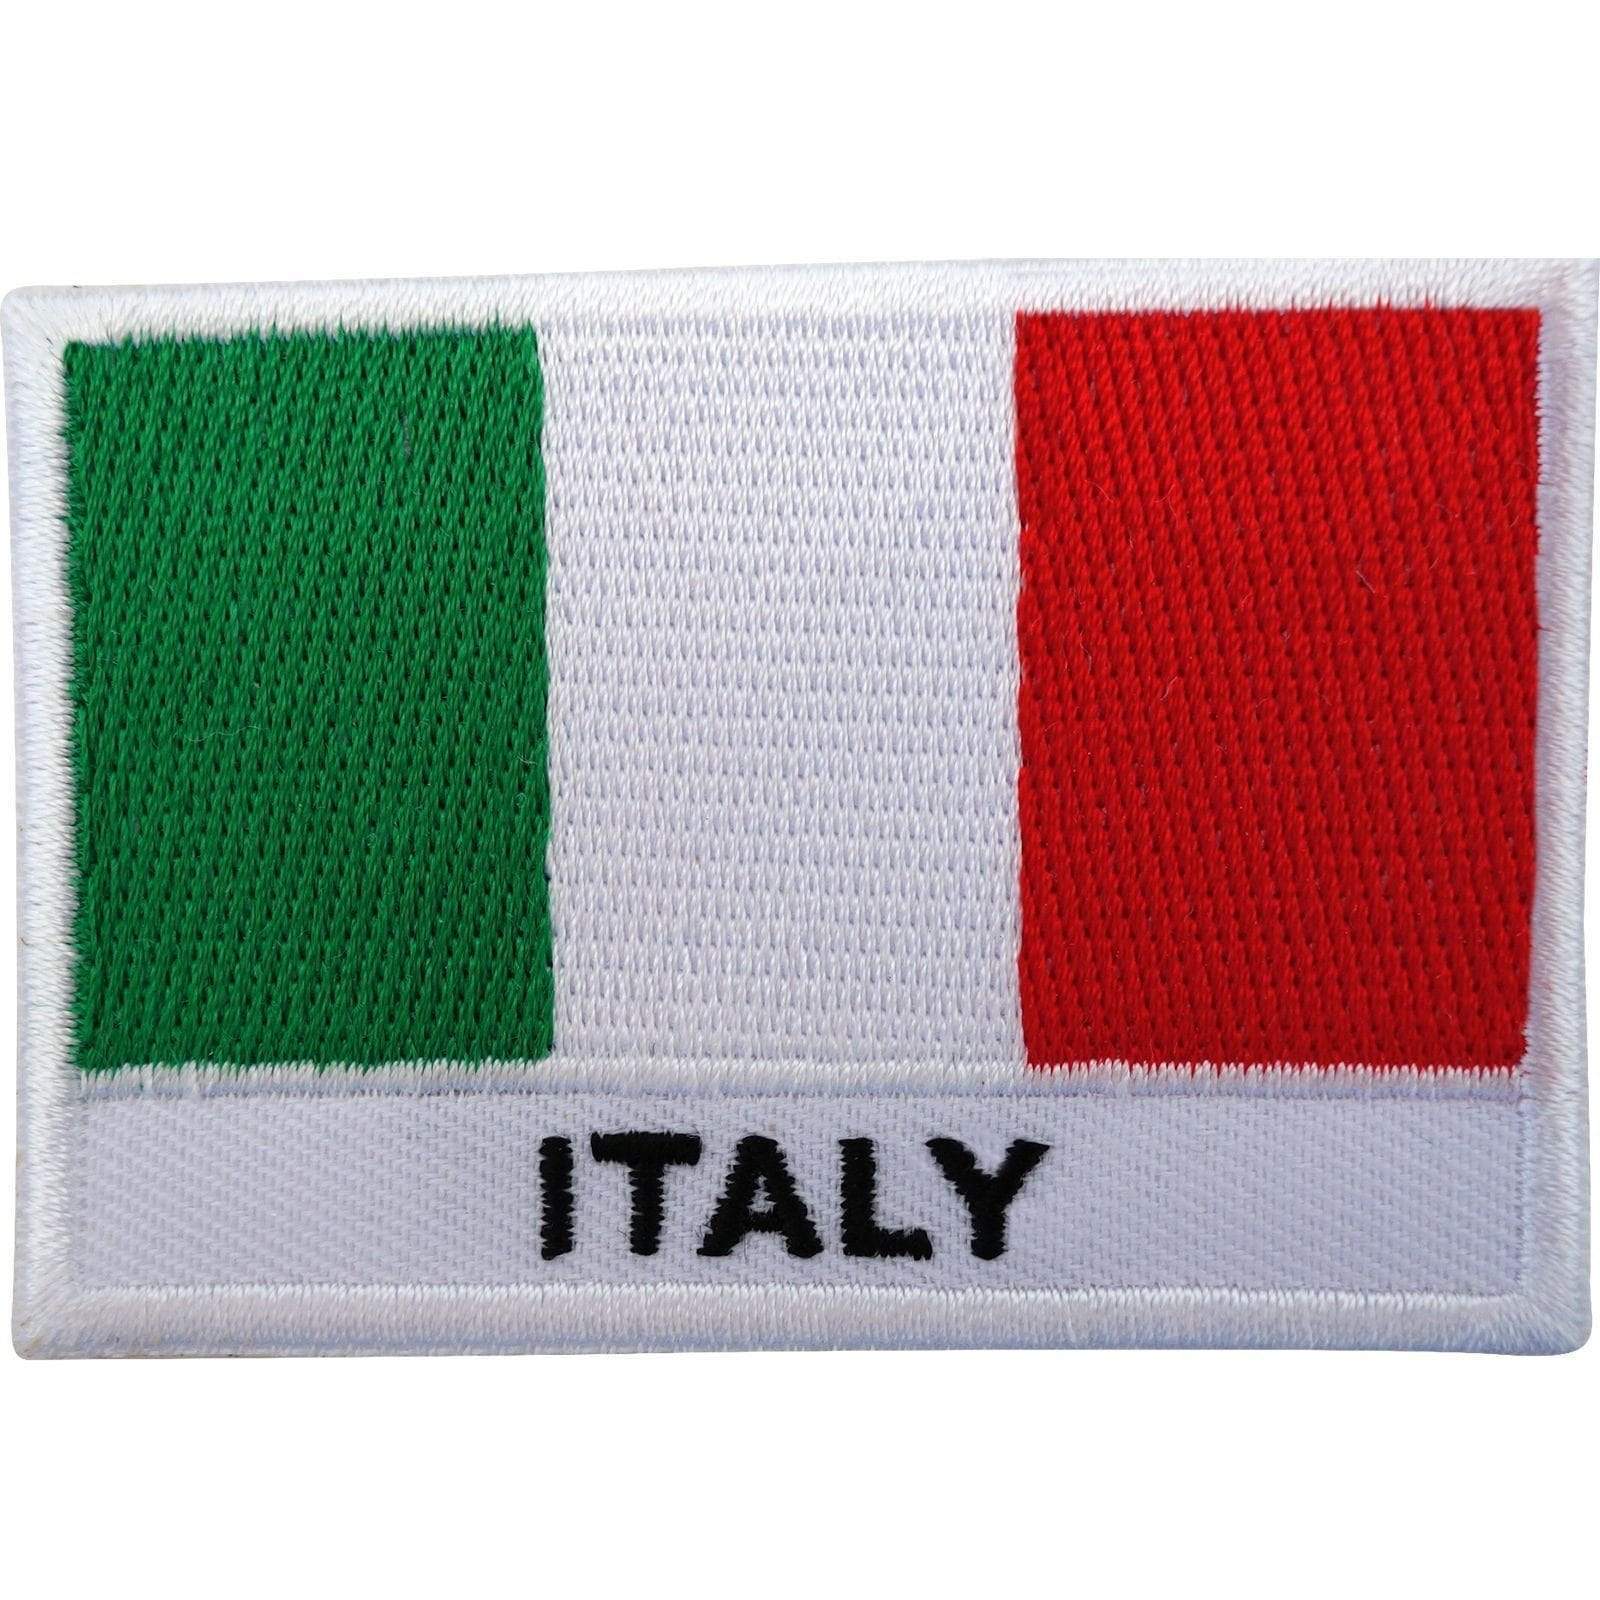 Italy Flag Patch Iron Sew On Embroidered Italian Shirt Badge Embroidery Applique